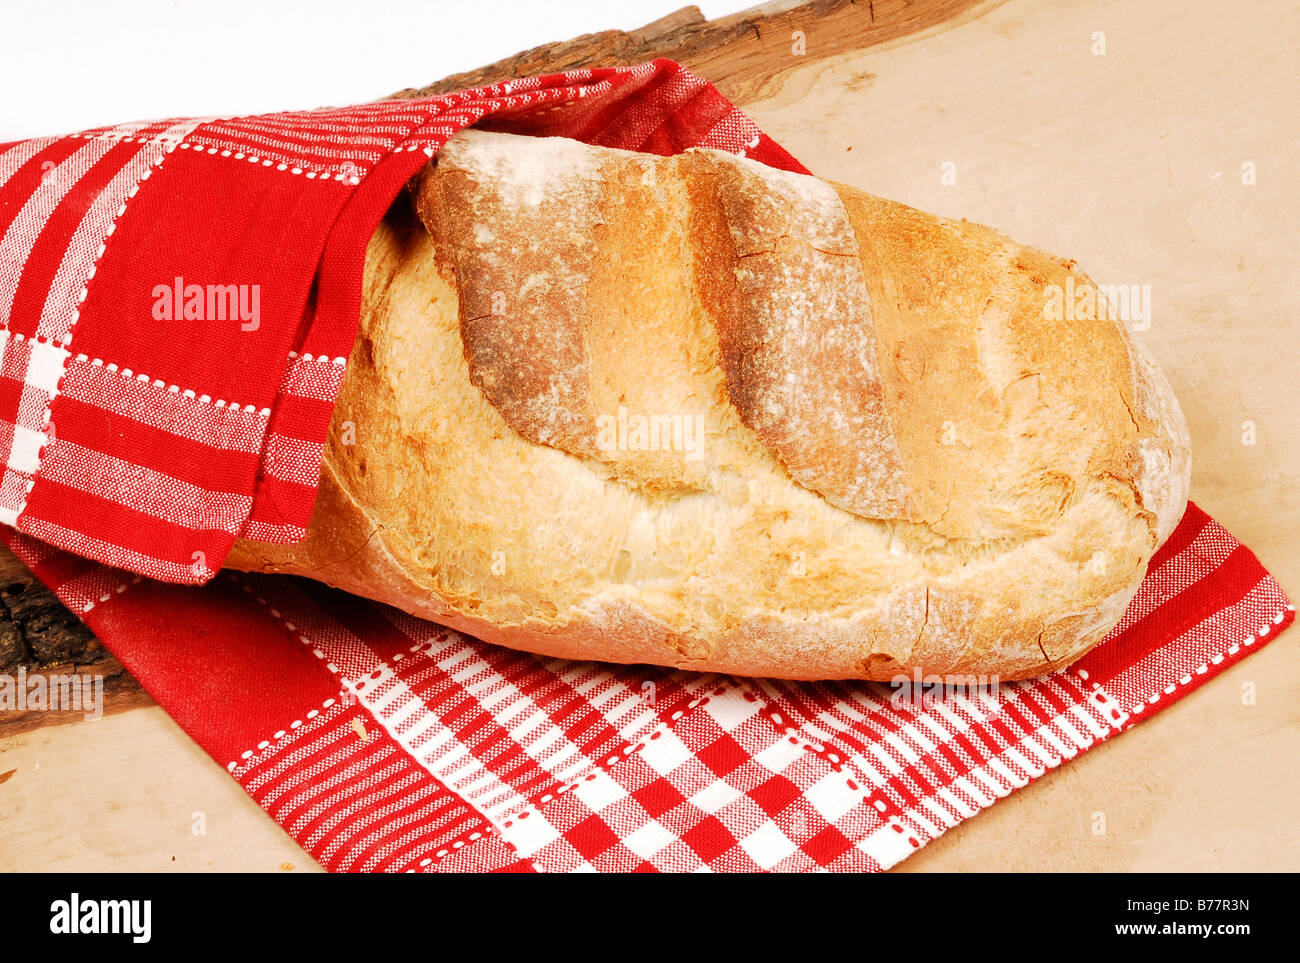 Loaf of bread wrapped in a tea towel Stock Photo